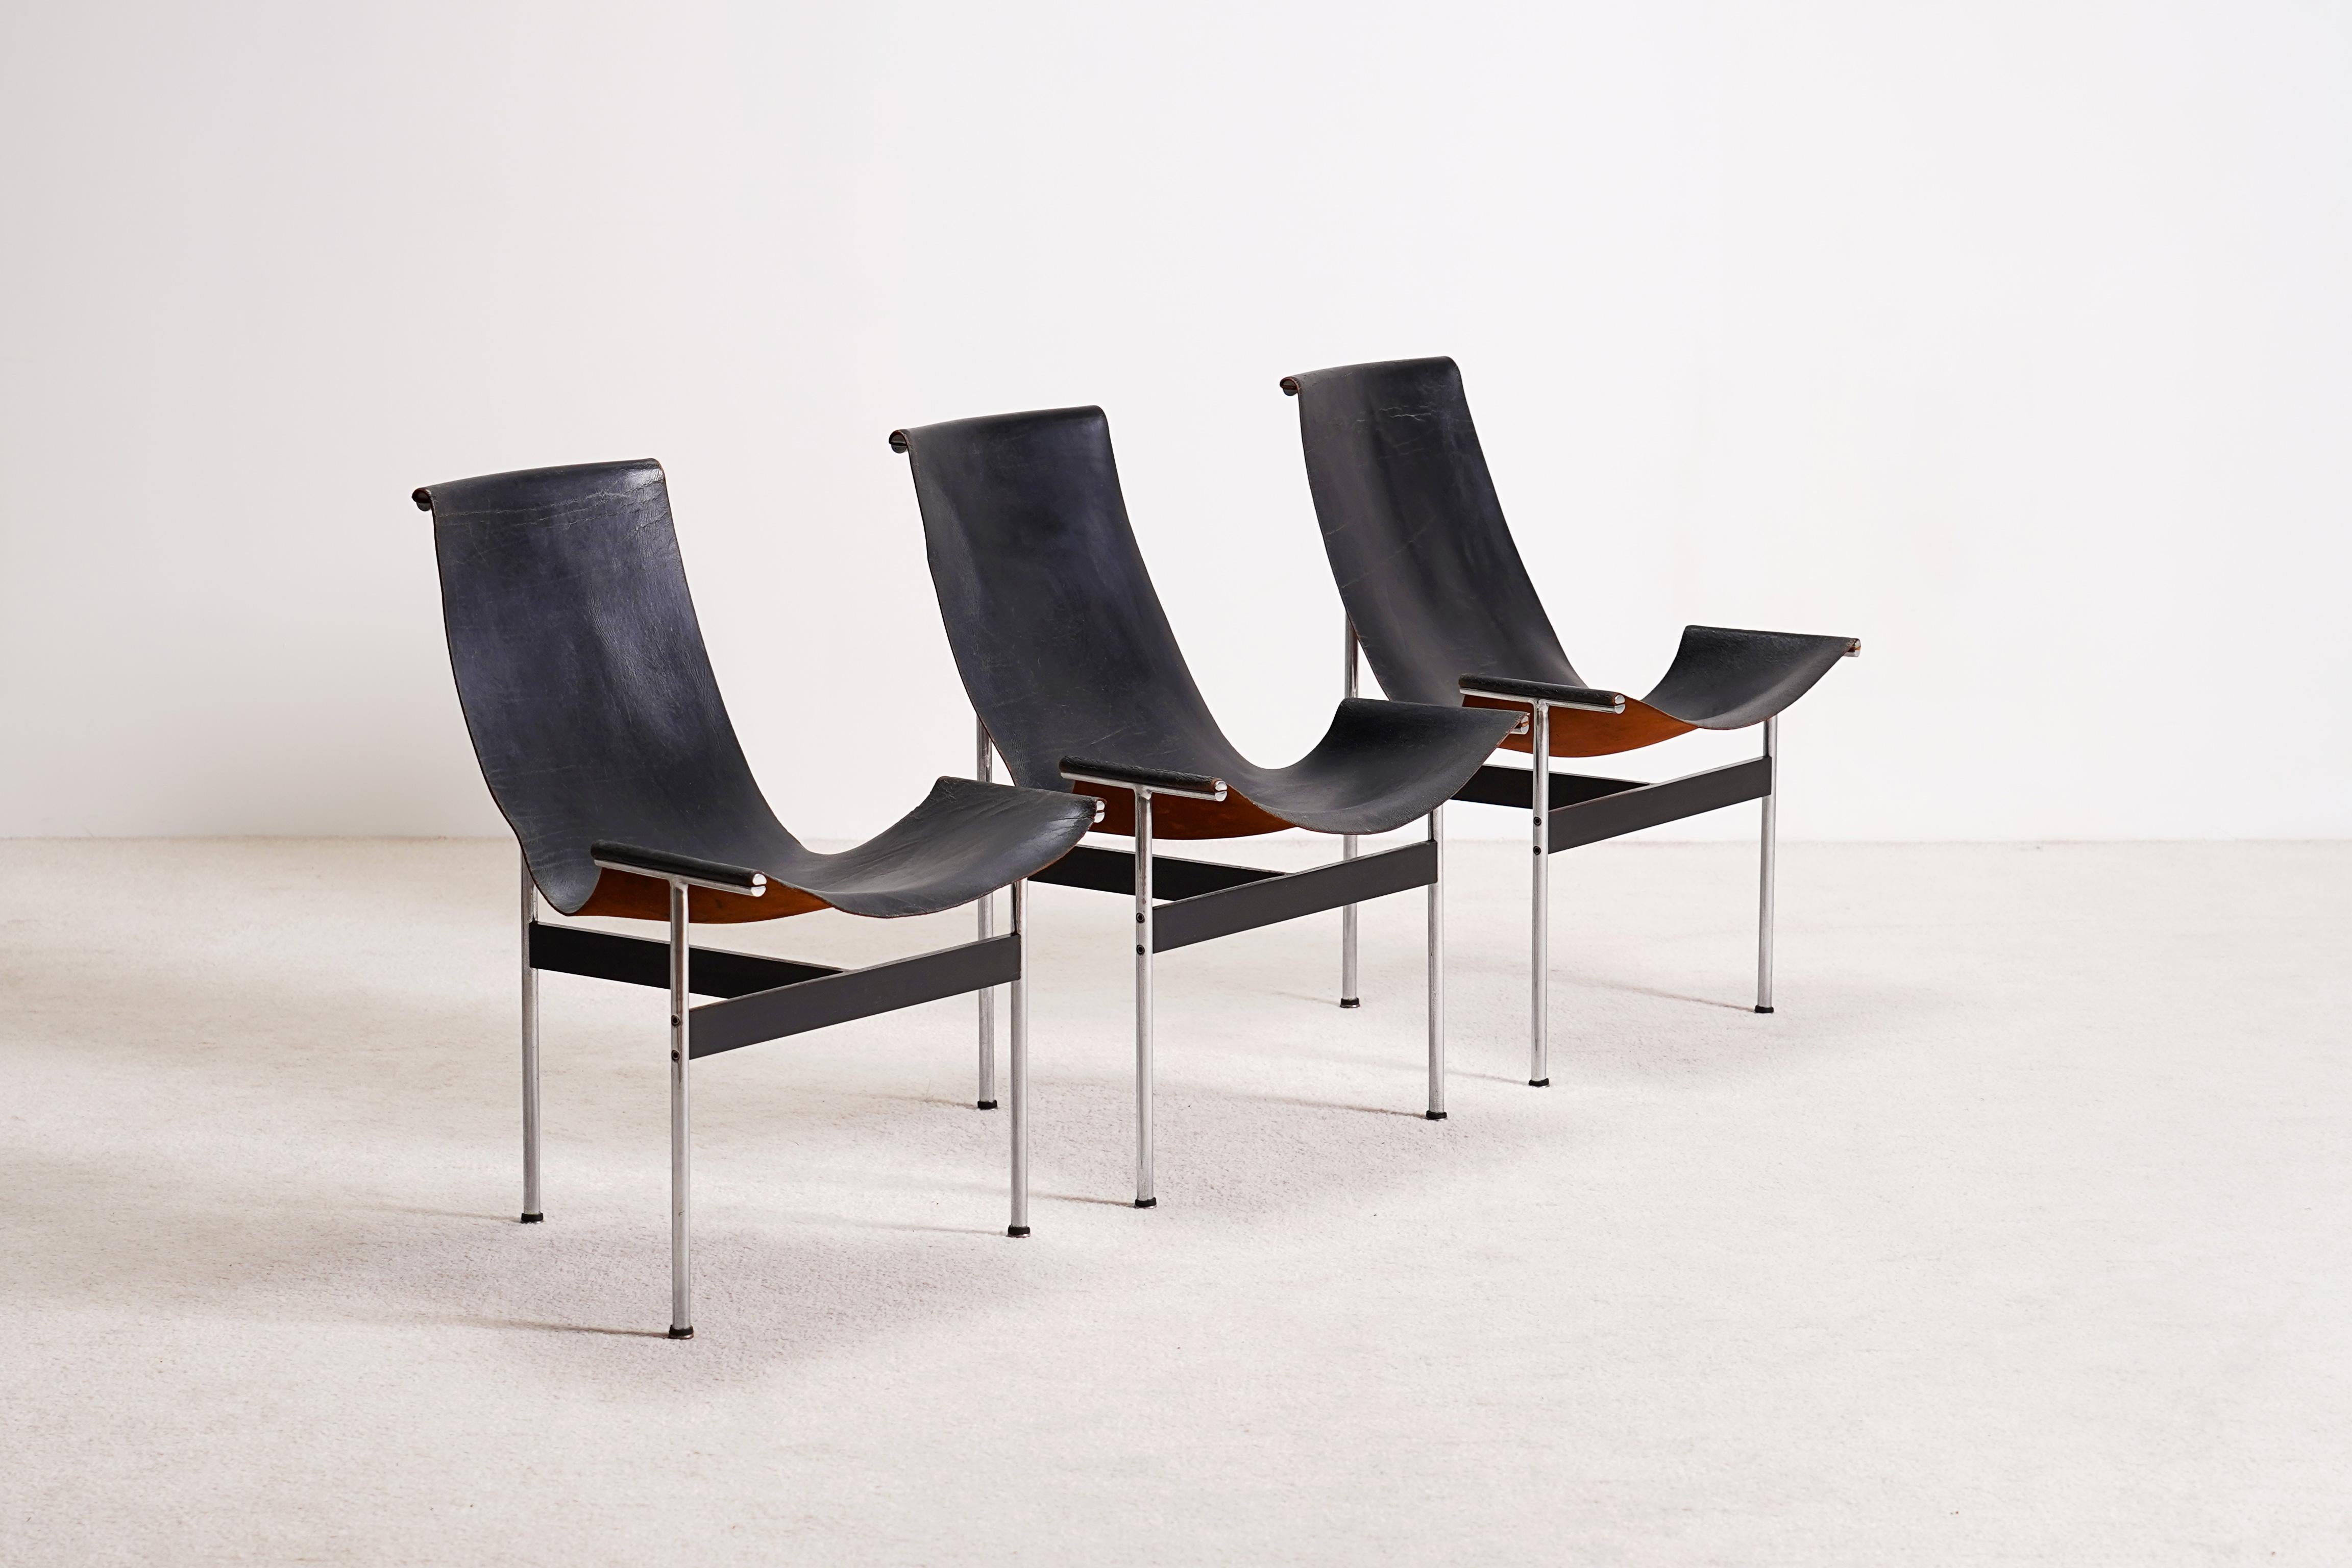 Katavolos, Kelley and Littell for Laverne Set of 3 T-Chairs in Black Leather For Sale 1